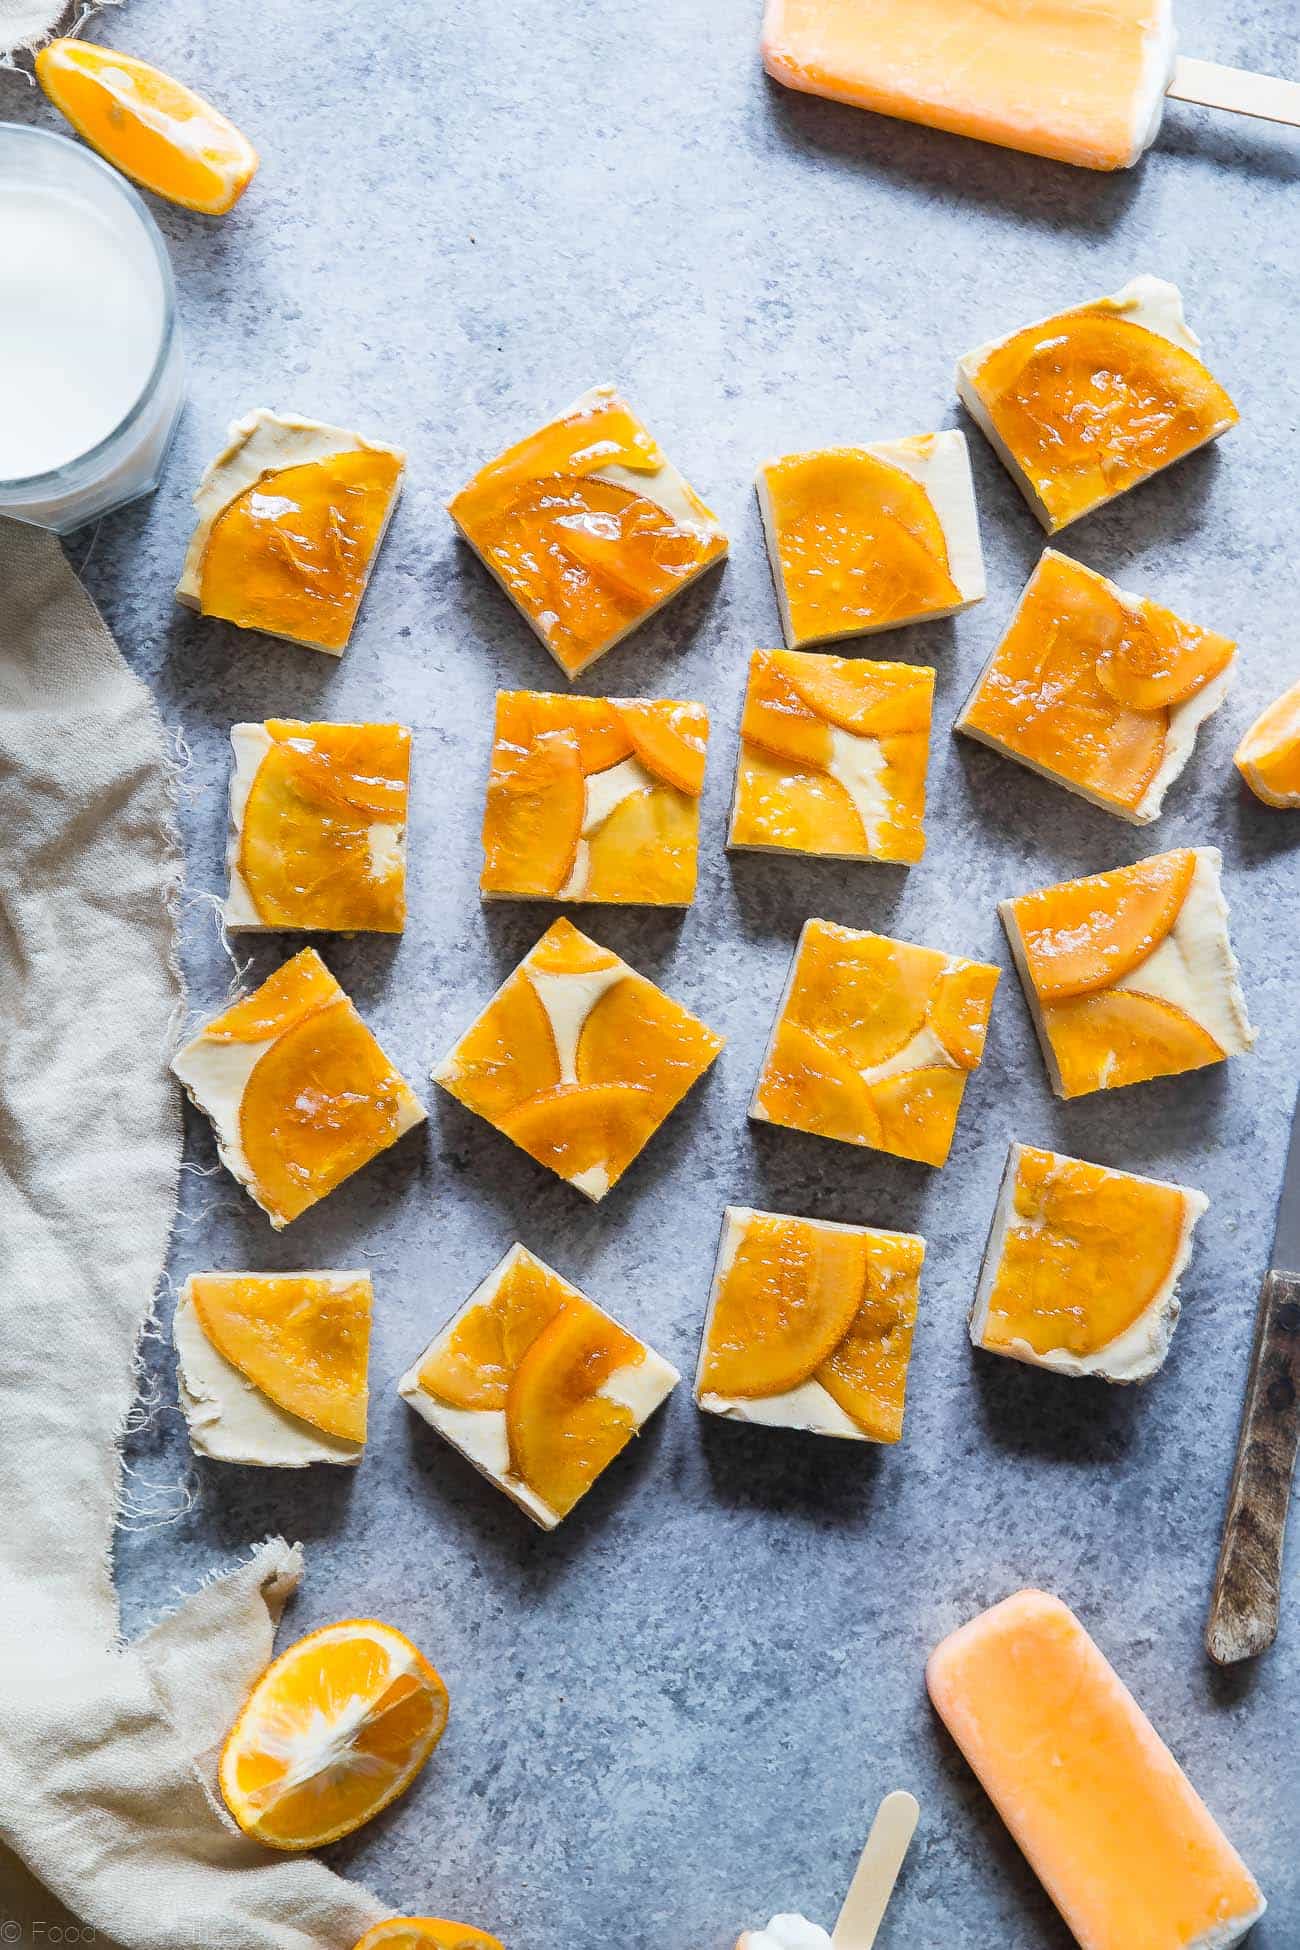 Healthy No Bake Creamsicle Cheesecake Bars - These raw vegan cheesecake bars have a creamy vanilla base, an orange topping and taste like a creamsicle! They're a dairy and gluten free treat for the Summer! | Foodfaithfitness.com | @FoodFaithFit